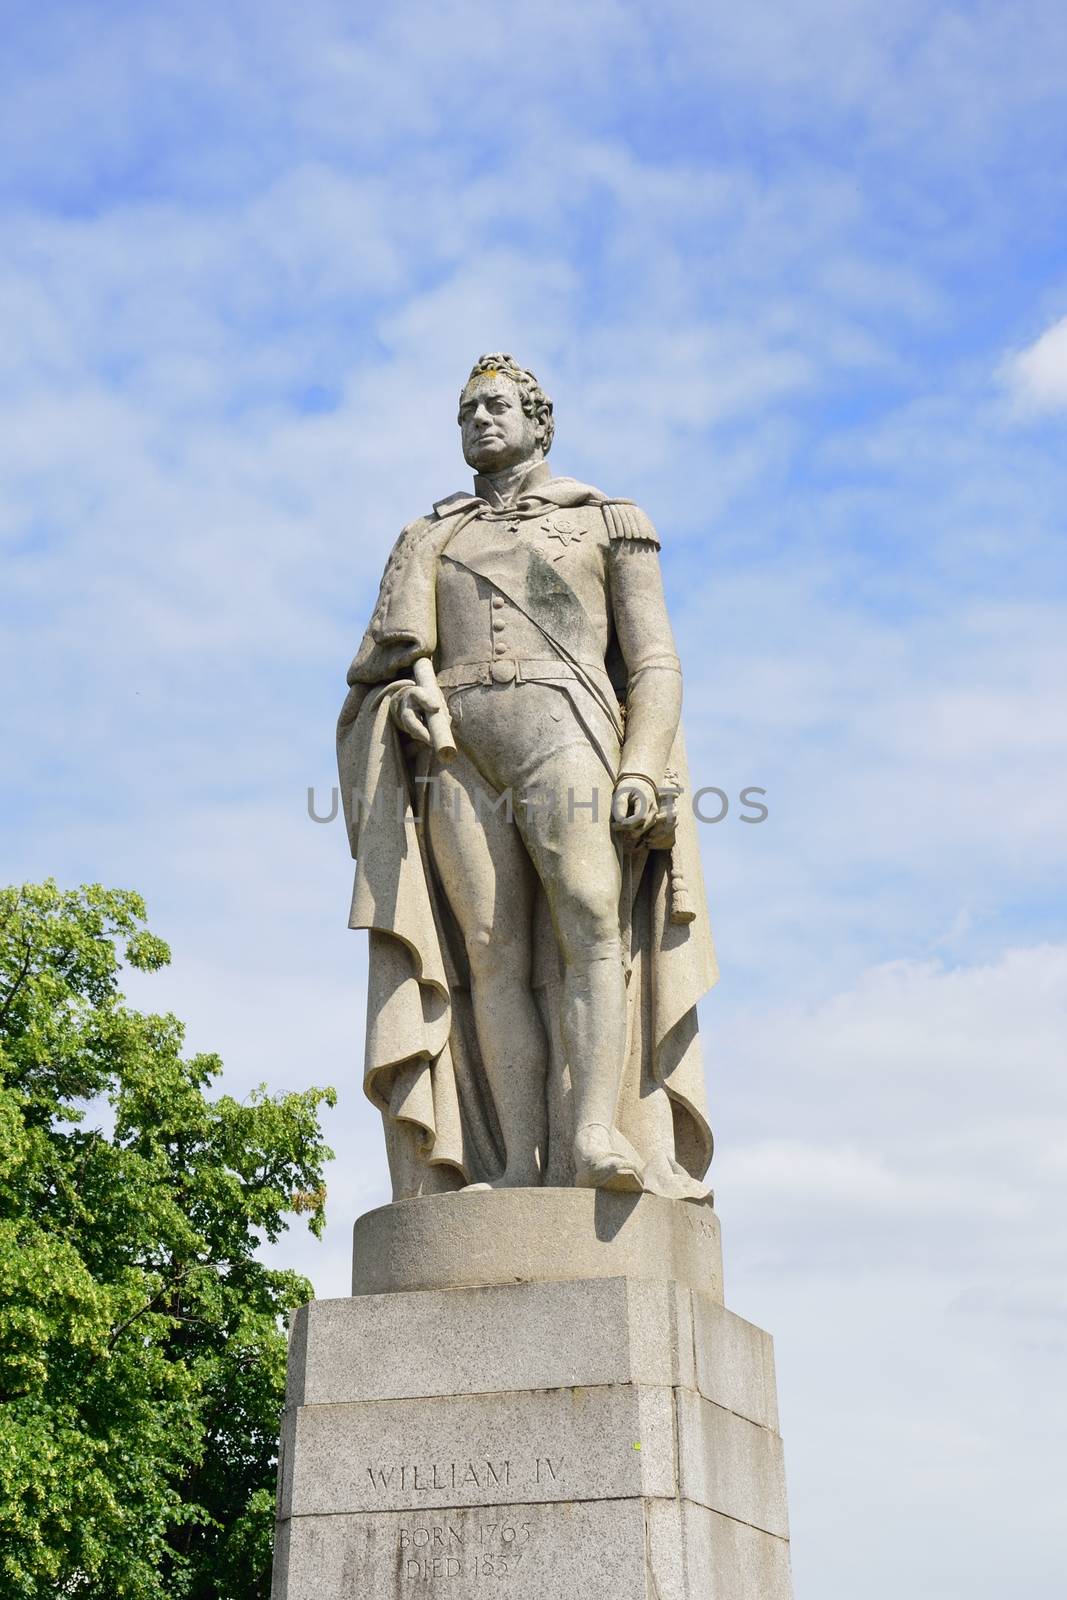 Statue of King William iv by pauws99